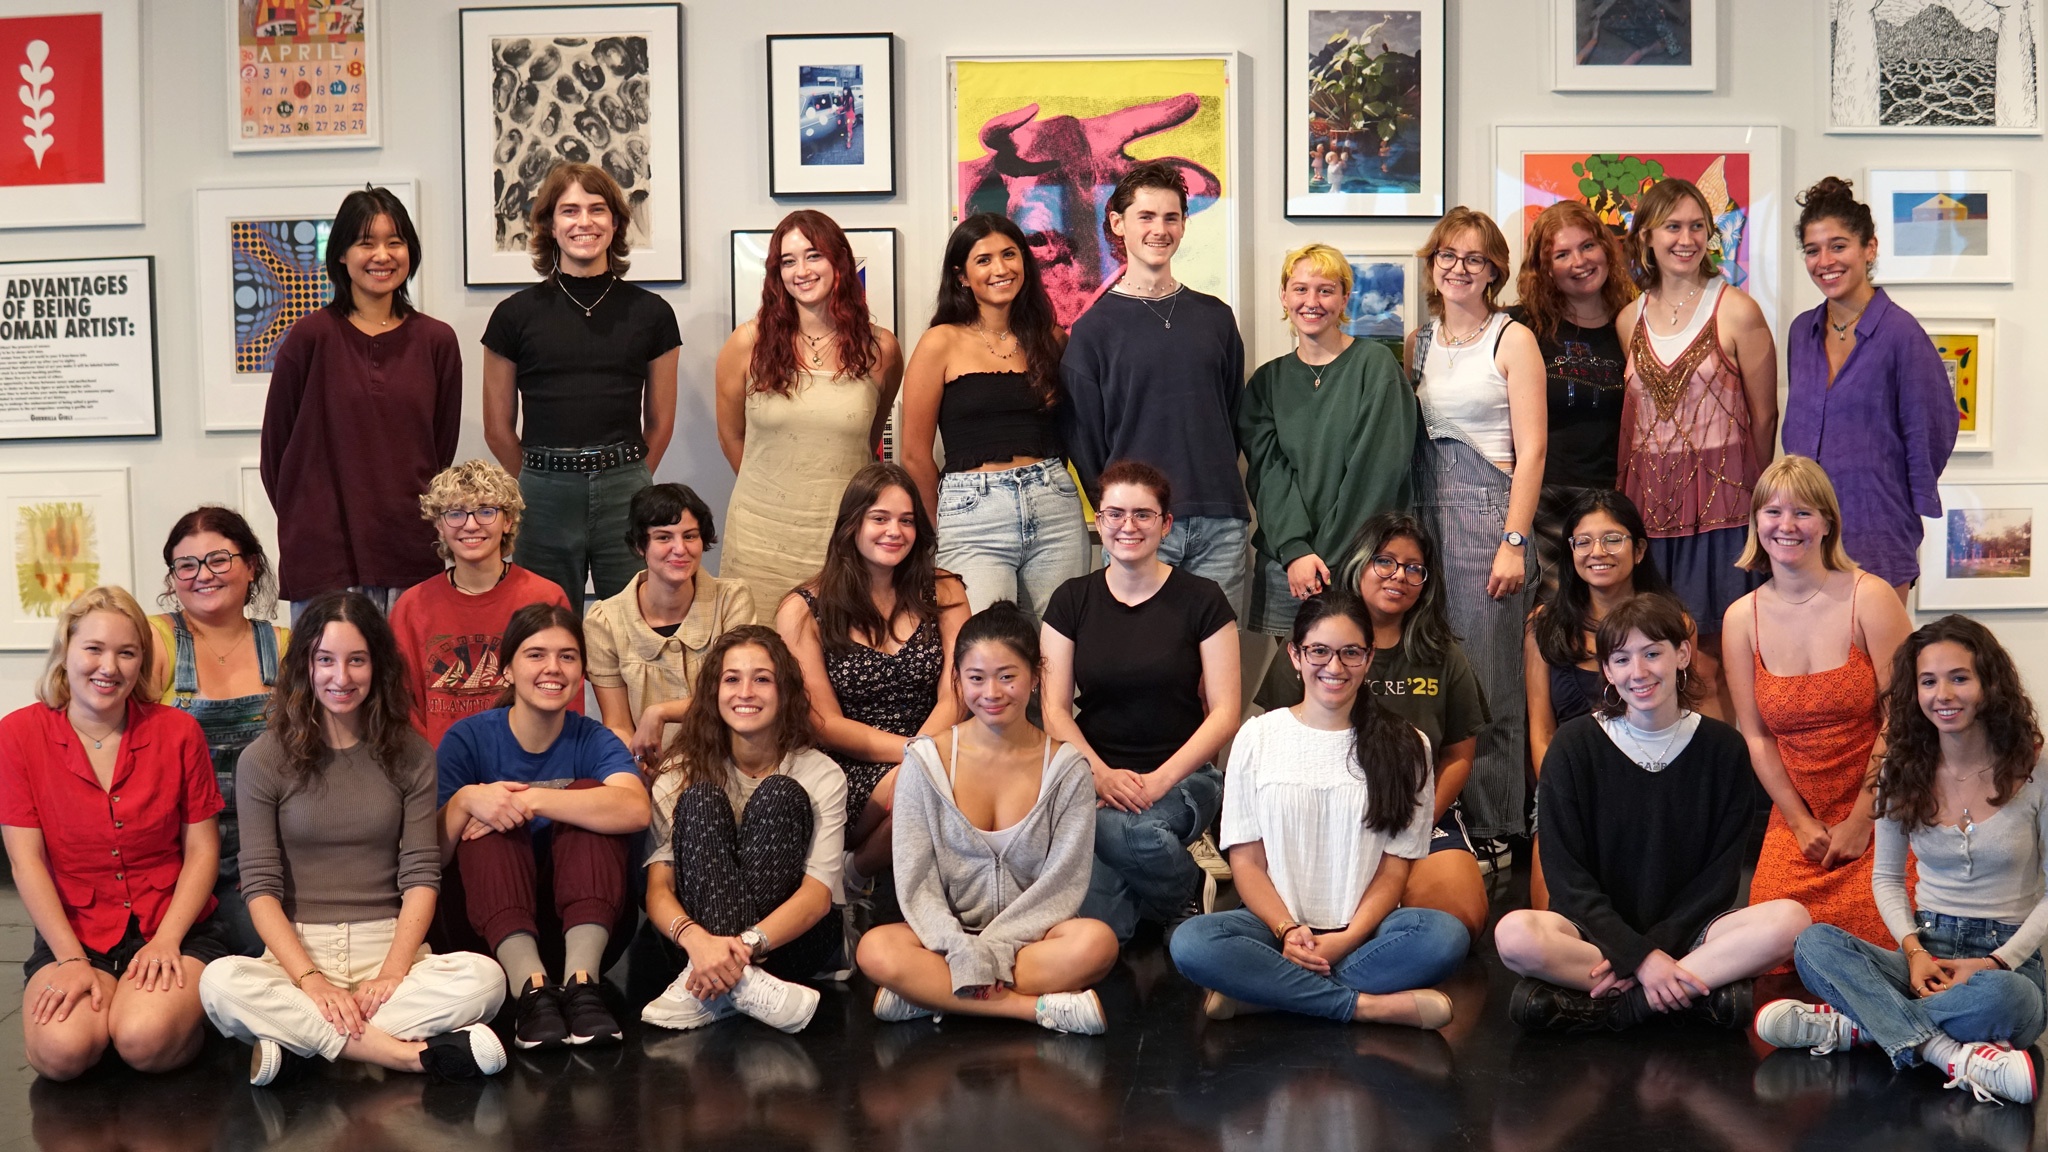 The Tang Student Advisory Council in front of [ROOM•MATE 2022
Living with Tang Art](/exhibitions/477-room-mate-2022-living-with-tang-art), September, 2022, photo by Tom Yoshikami.